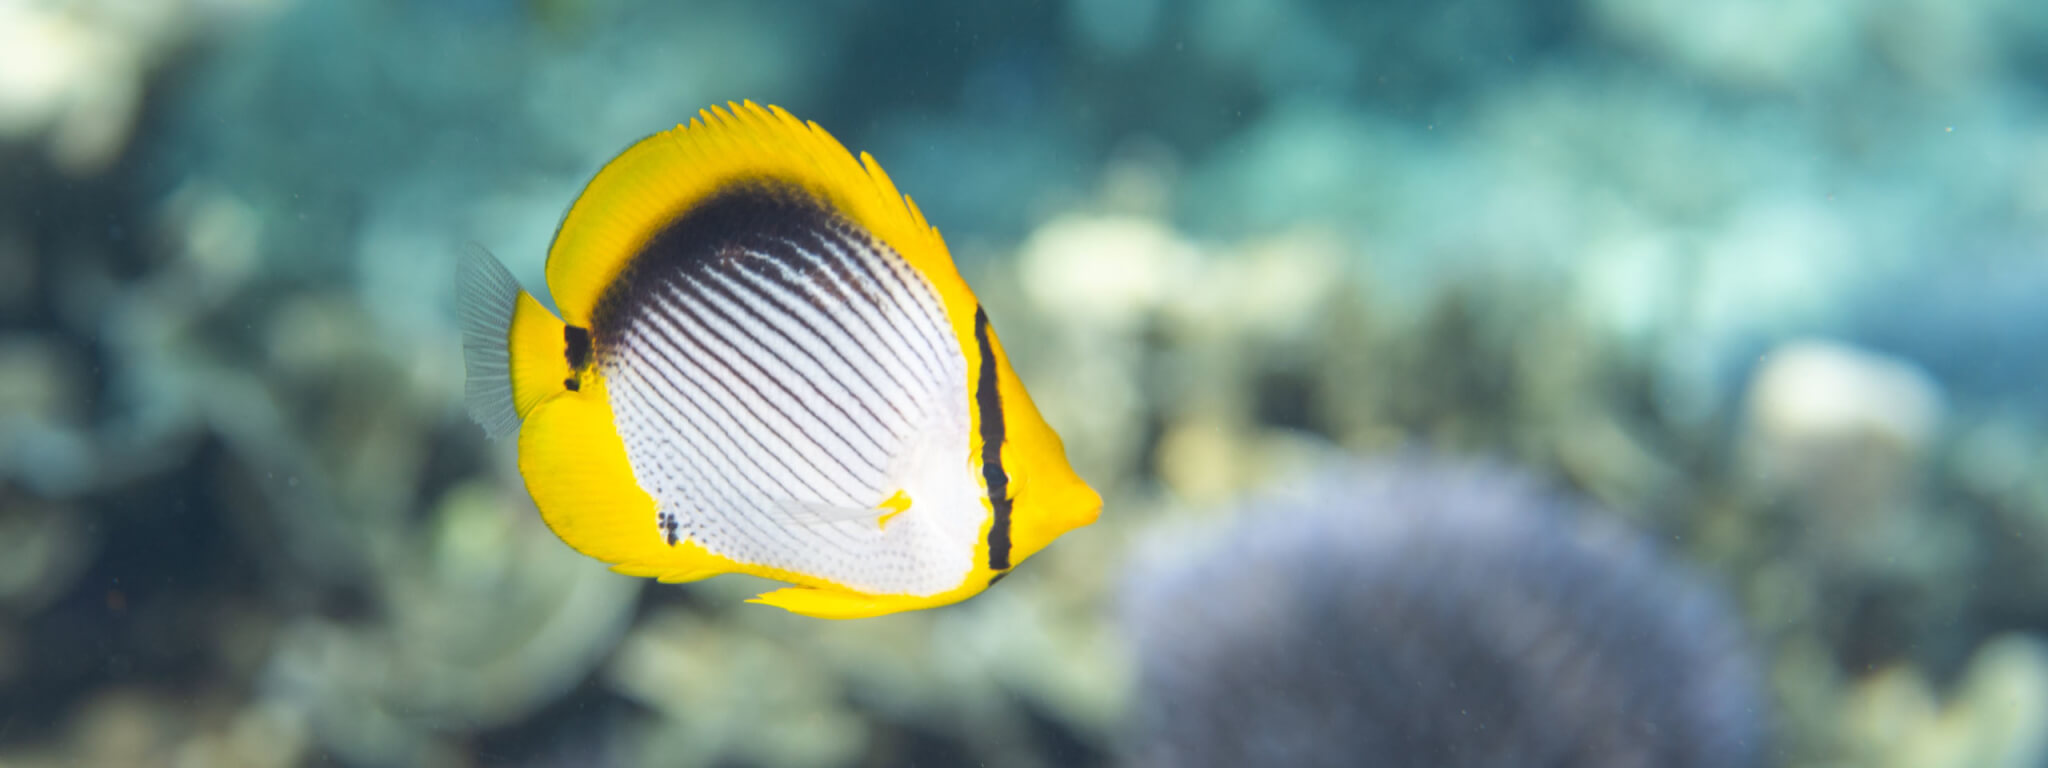 Black-lined butterflyfish photographed while snorkeling in the Banda Islands